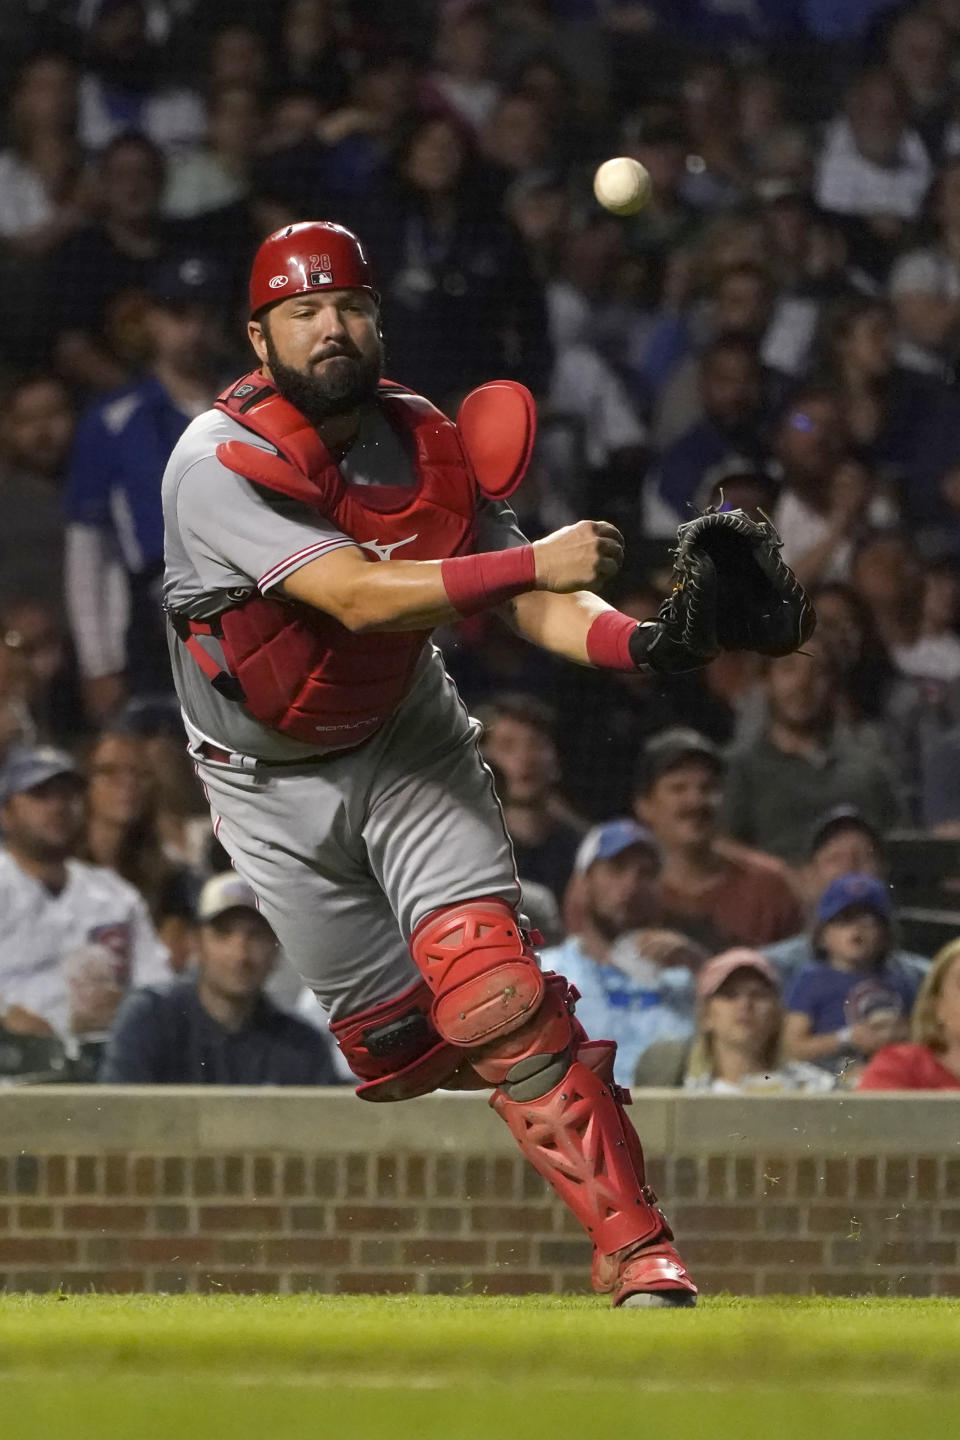 Cincinnati Reds catcher Austin Romine throws out Chicago Cubs' Yan Gomes at first during the sixth inning of a baseball game Tuesday, Sept. 6, 2022, in Chicago. (AP Photo/Charles Rex Arbogast)